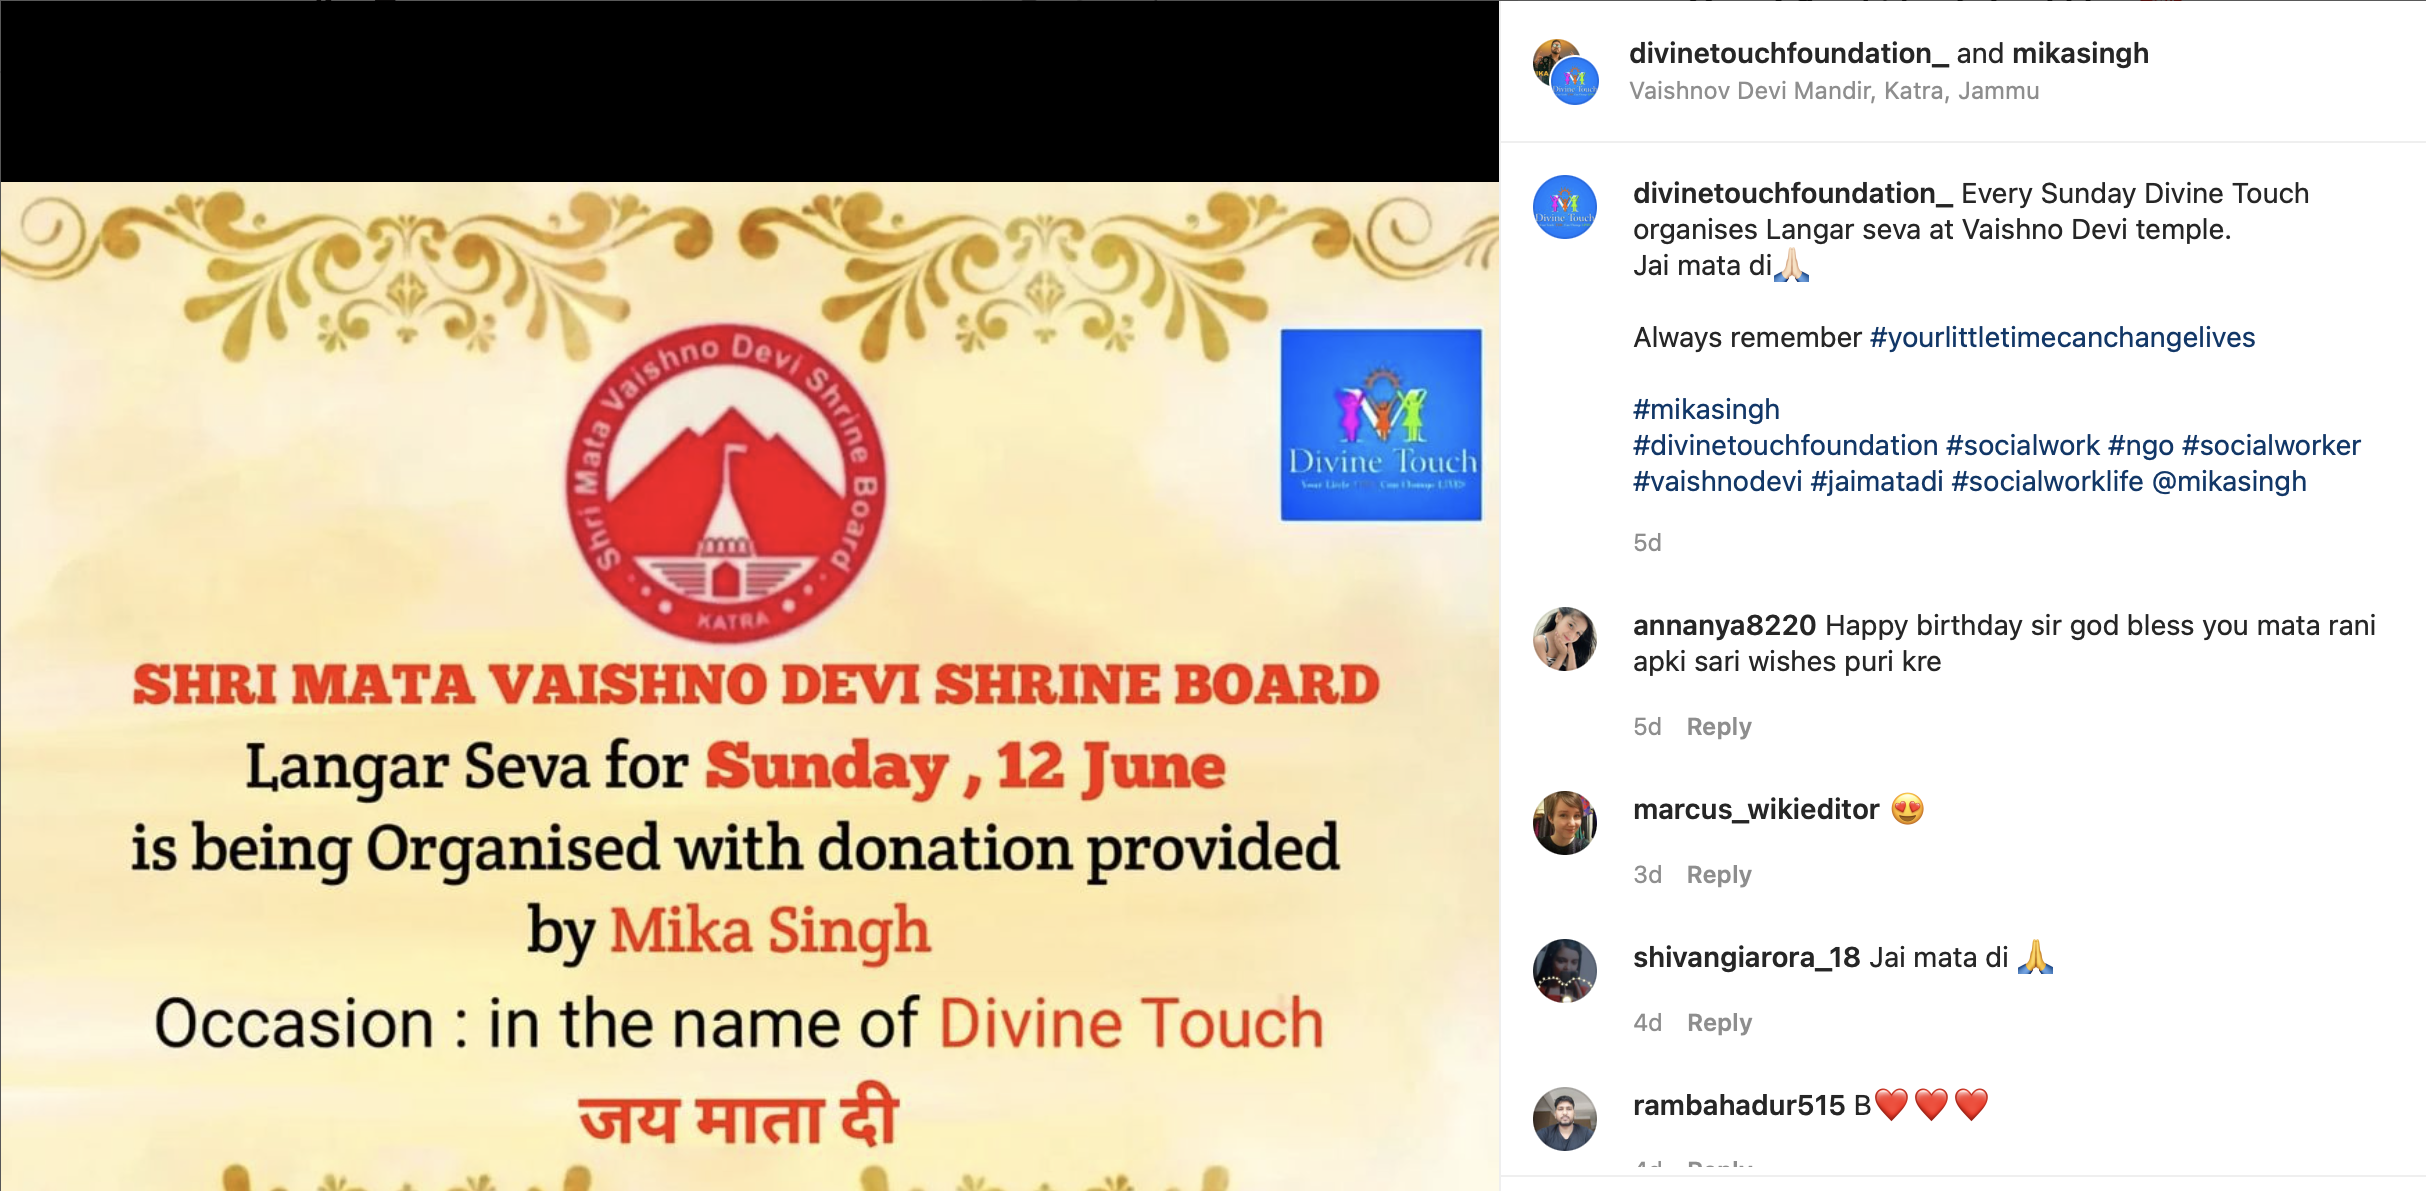 Mika Singh NGO Foundation, Divine Touch Foundation